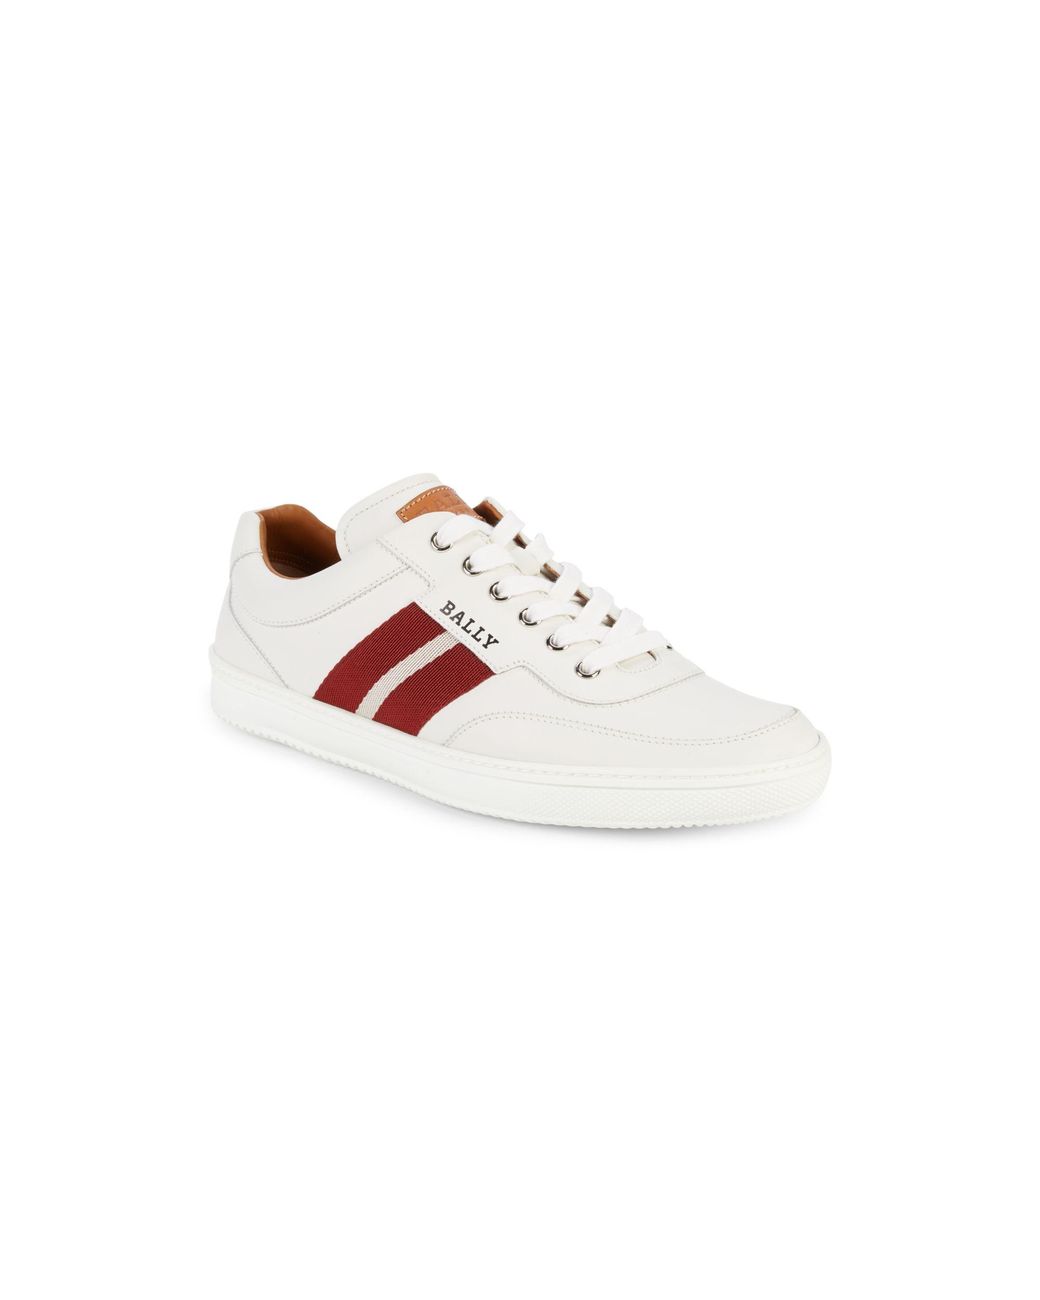 Bally Oriano Leather Sneakers in White 